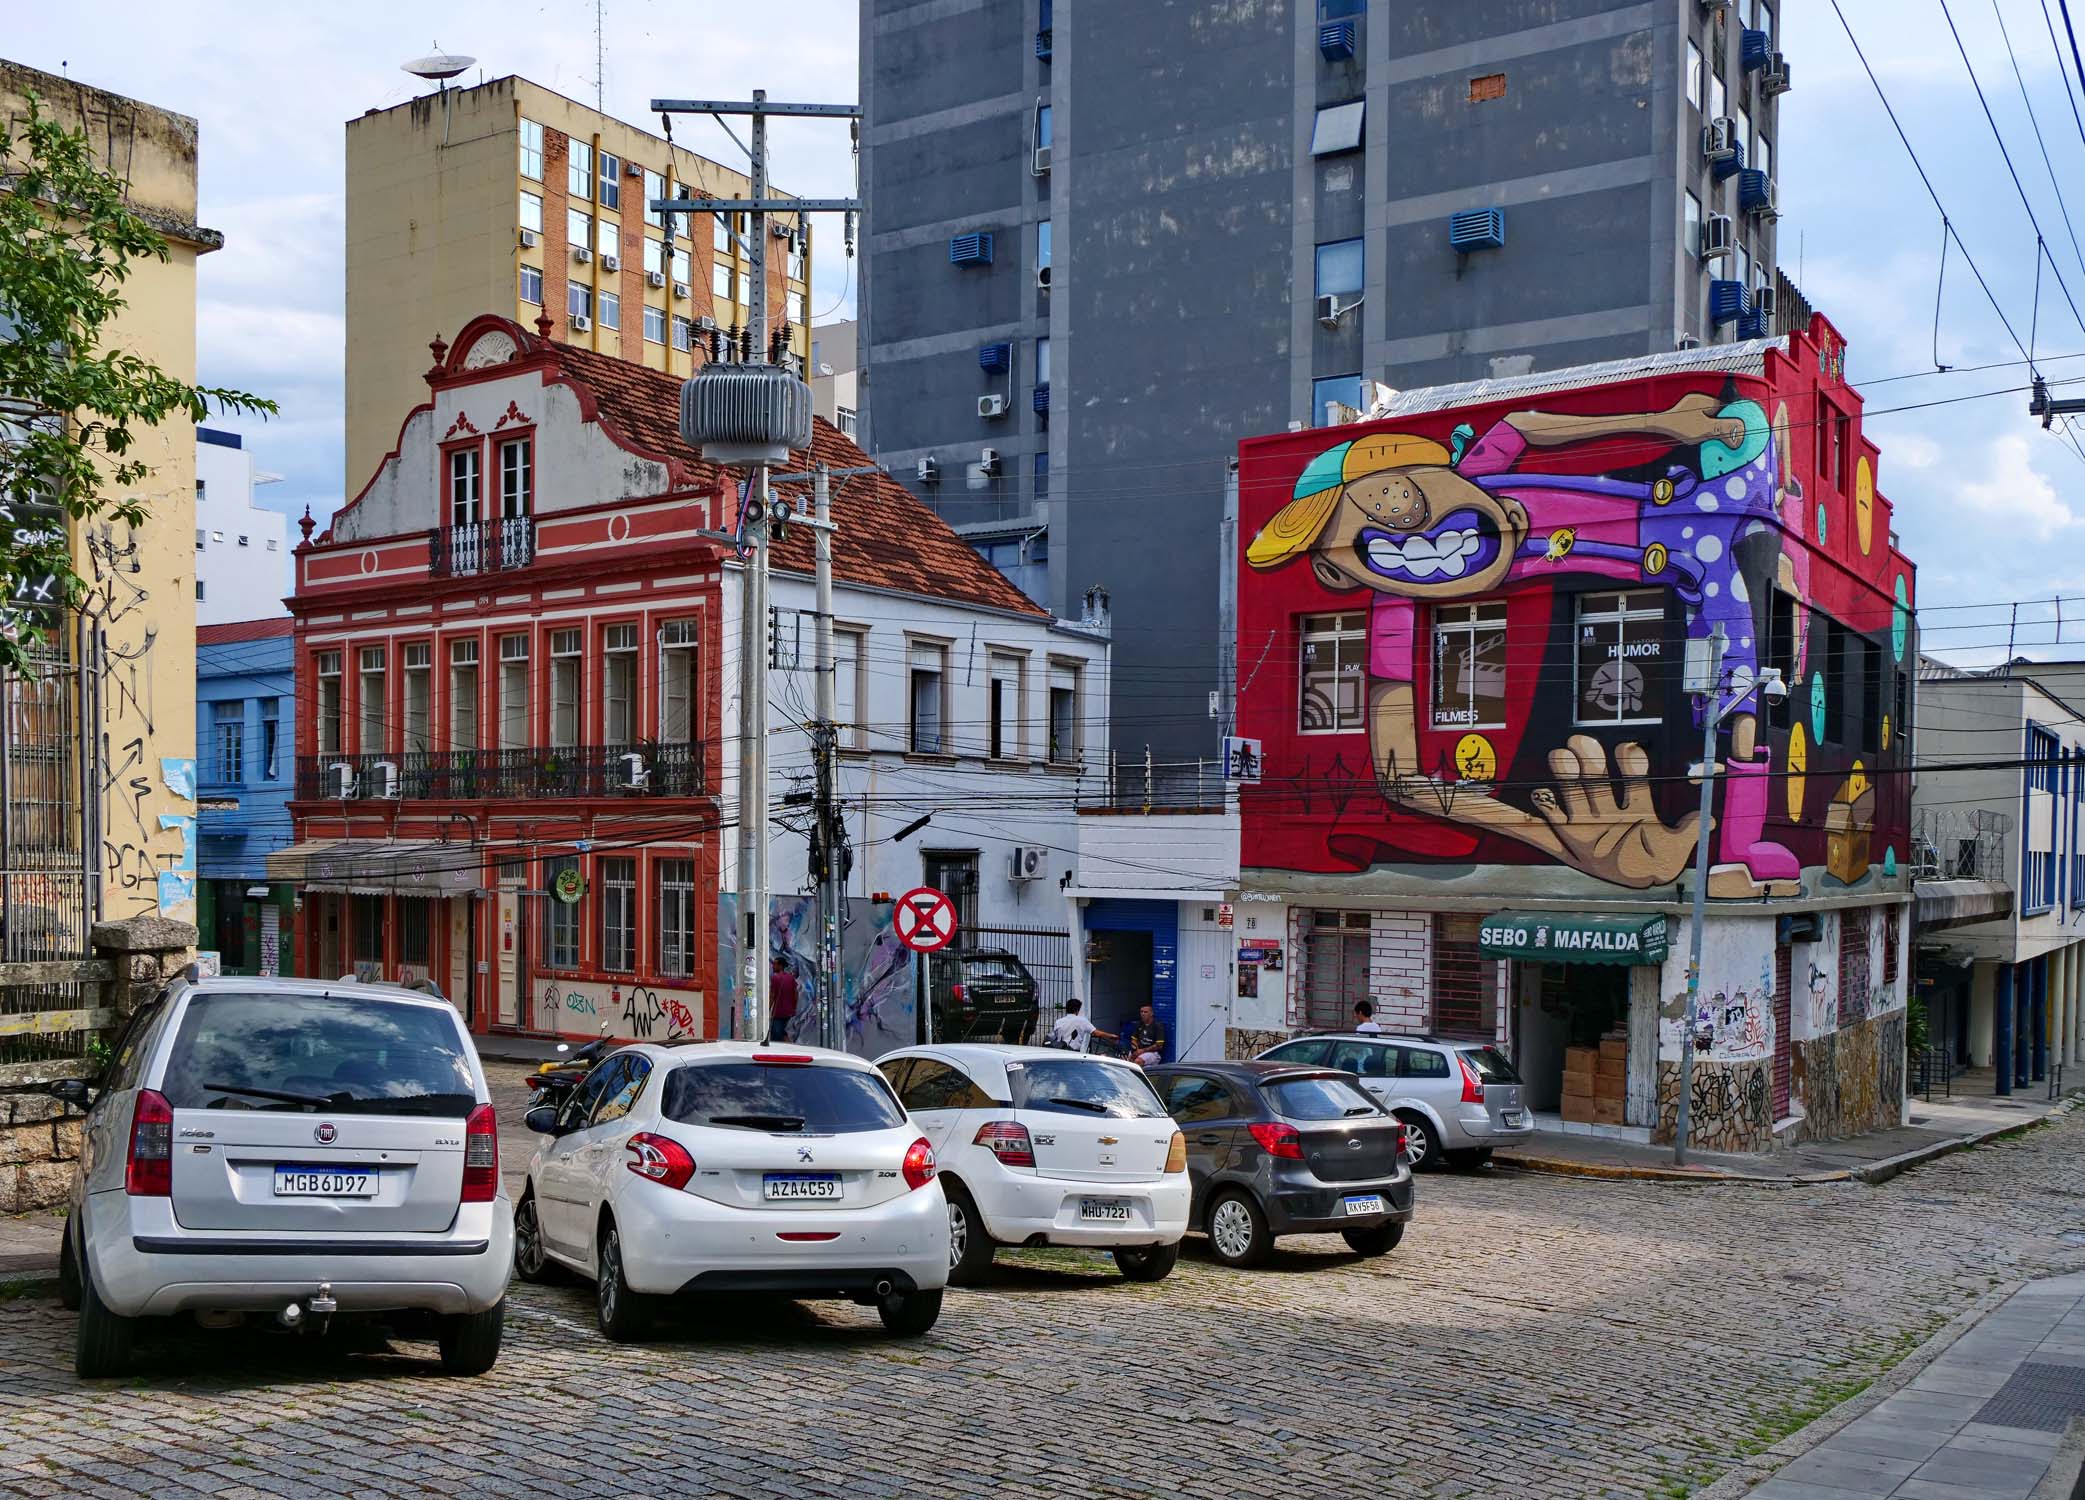 Saldanha Marinho street; the Kibelndia restaurant (a favorite) is located at the red house at left.